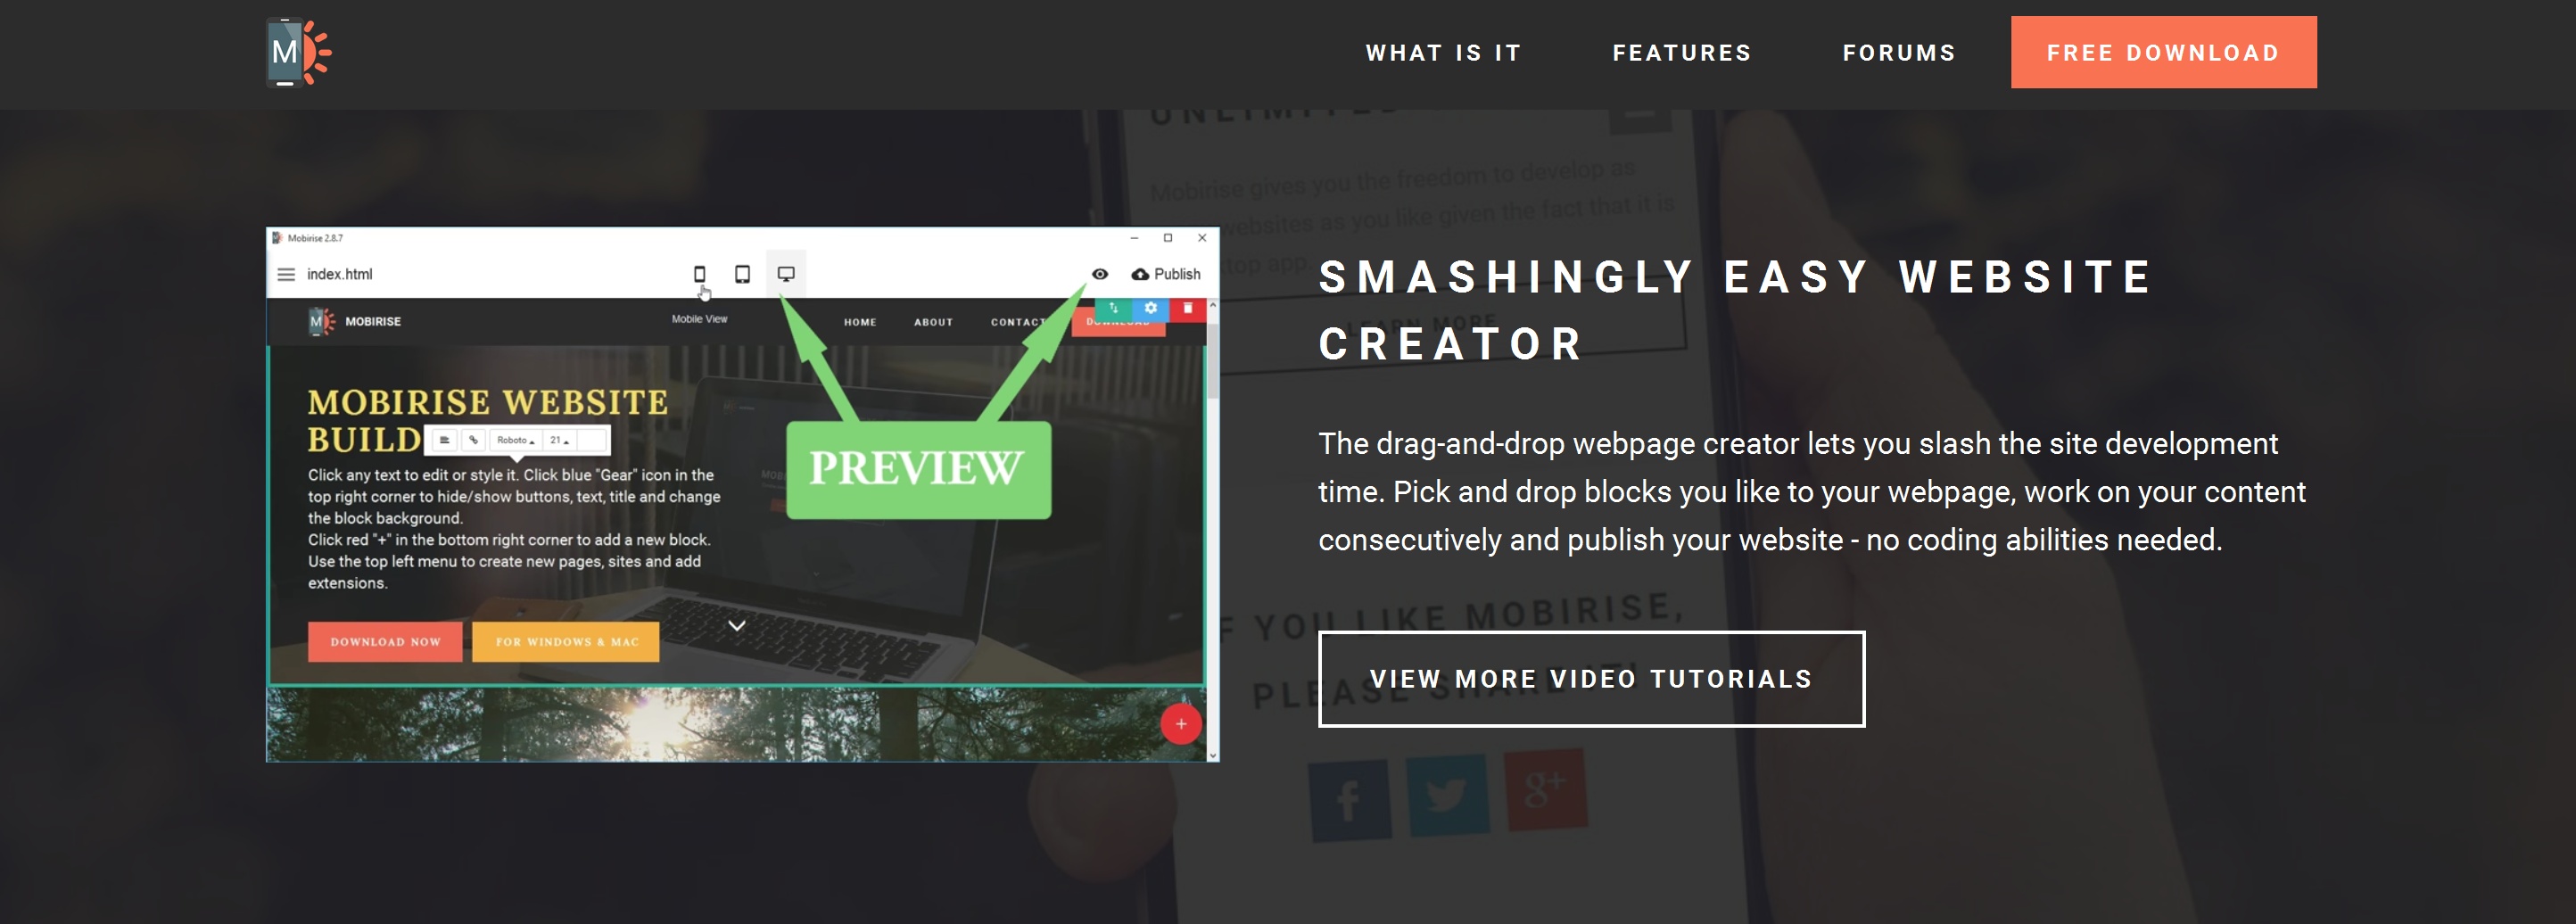 Drag and Drop Simple Website Creator Review